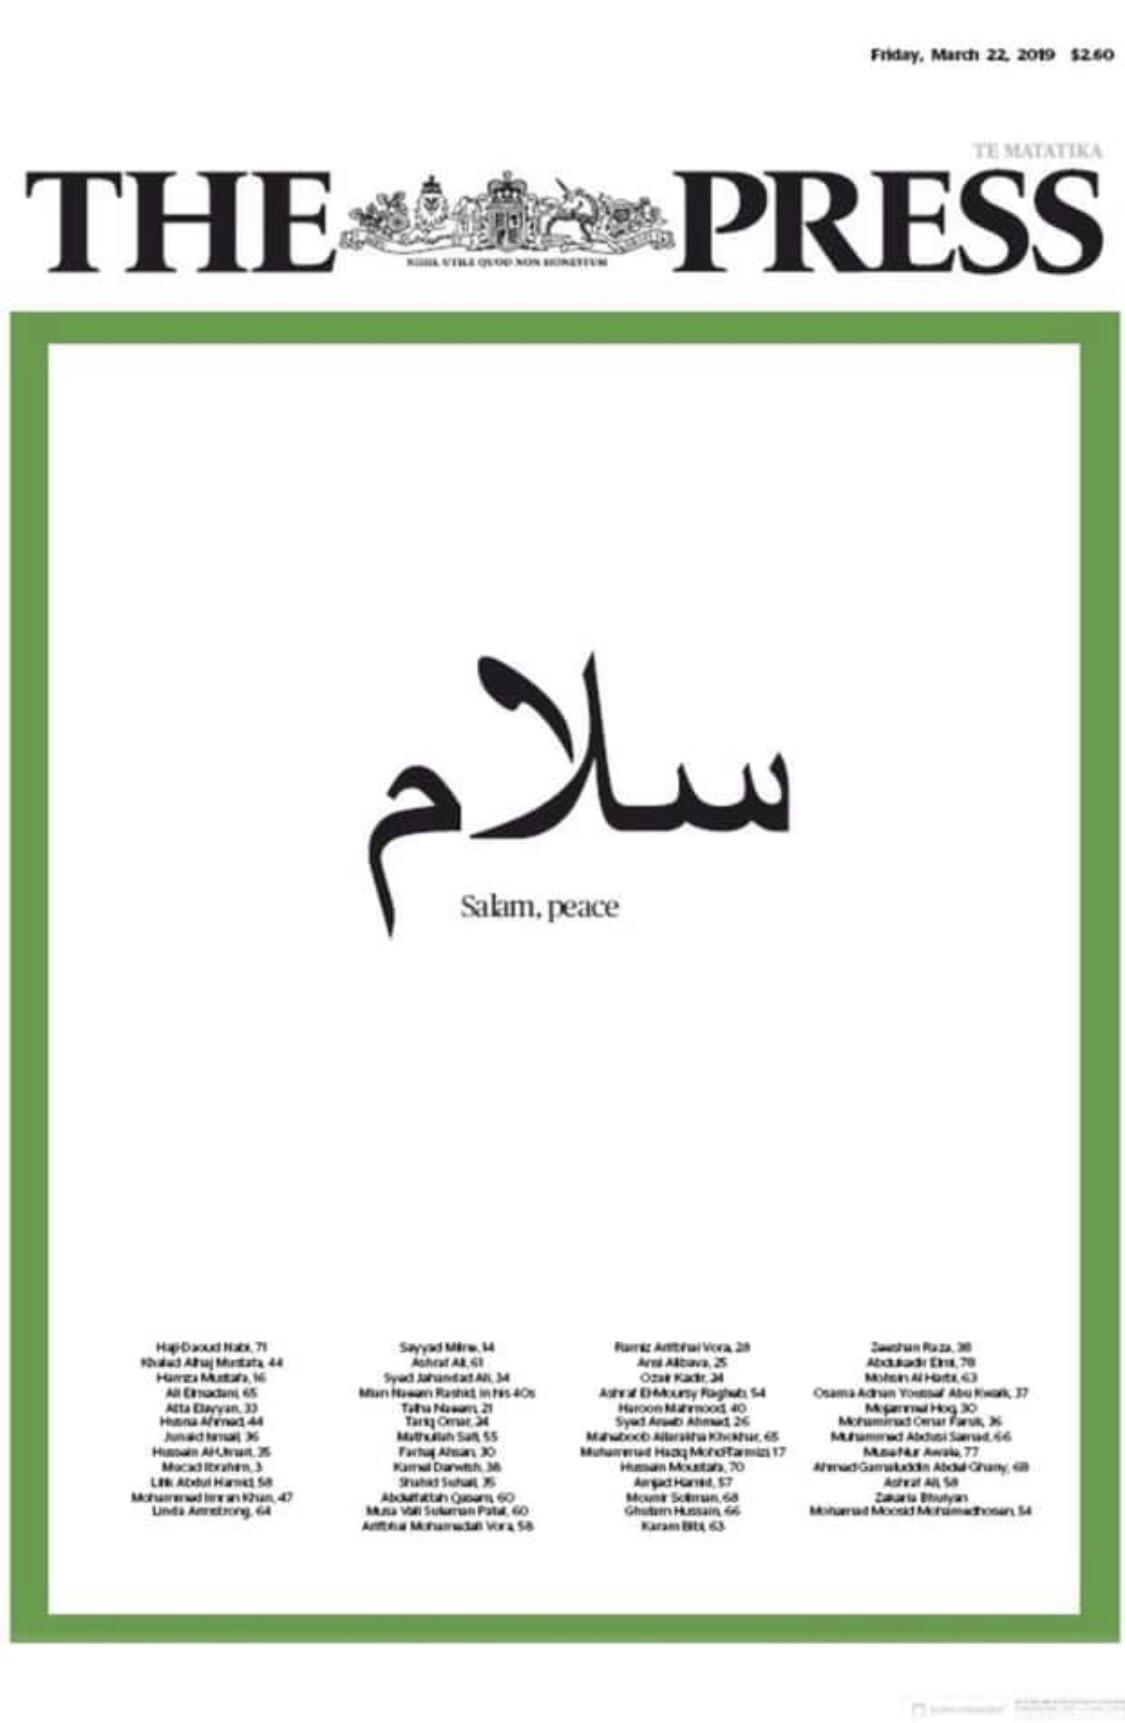 The+frontpage+of+Christchurch%26%238217%3Bs+local+newspaper%2C+with+the+names+of+victims+who+died+in+last+week%26%238217%3Bs+attack.